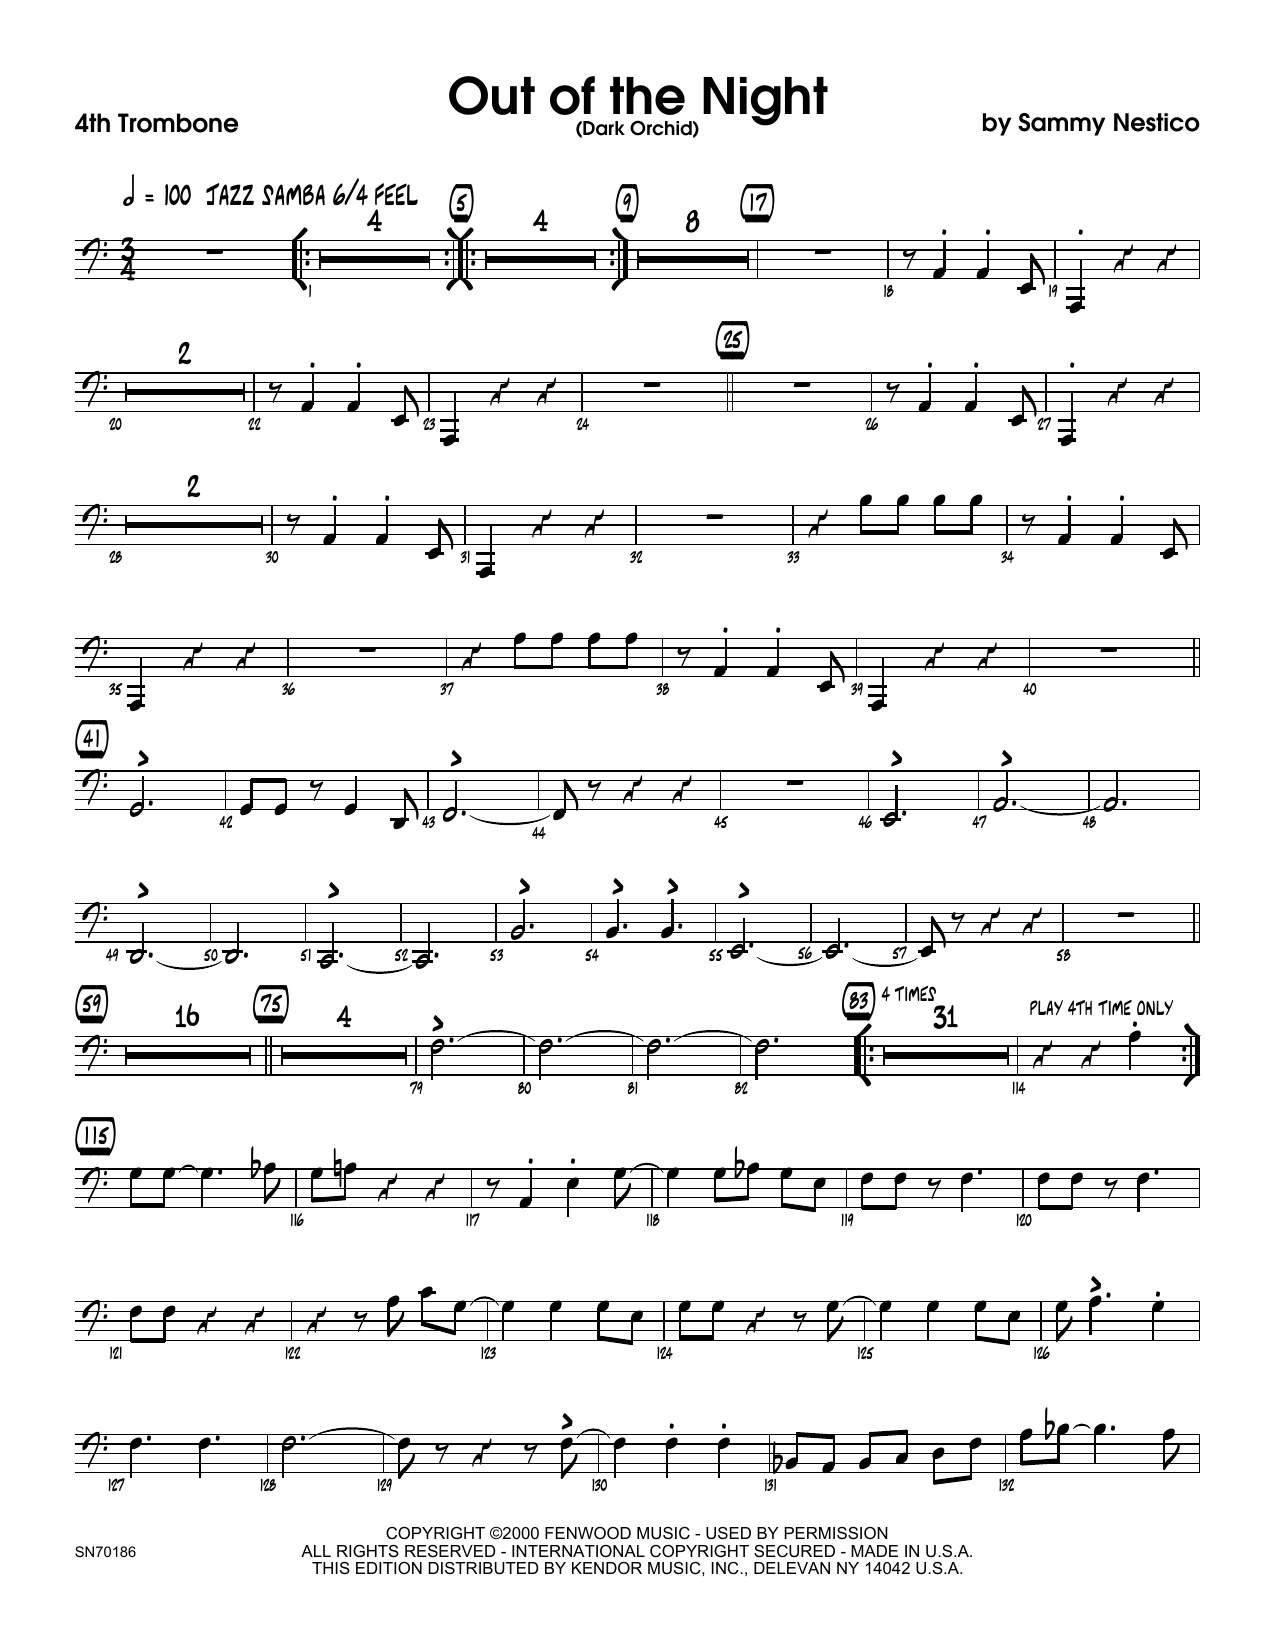 Download Sammy Nestico Out of the Night - 4th Trombone Sheet Music